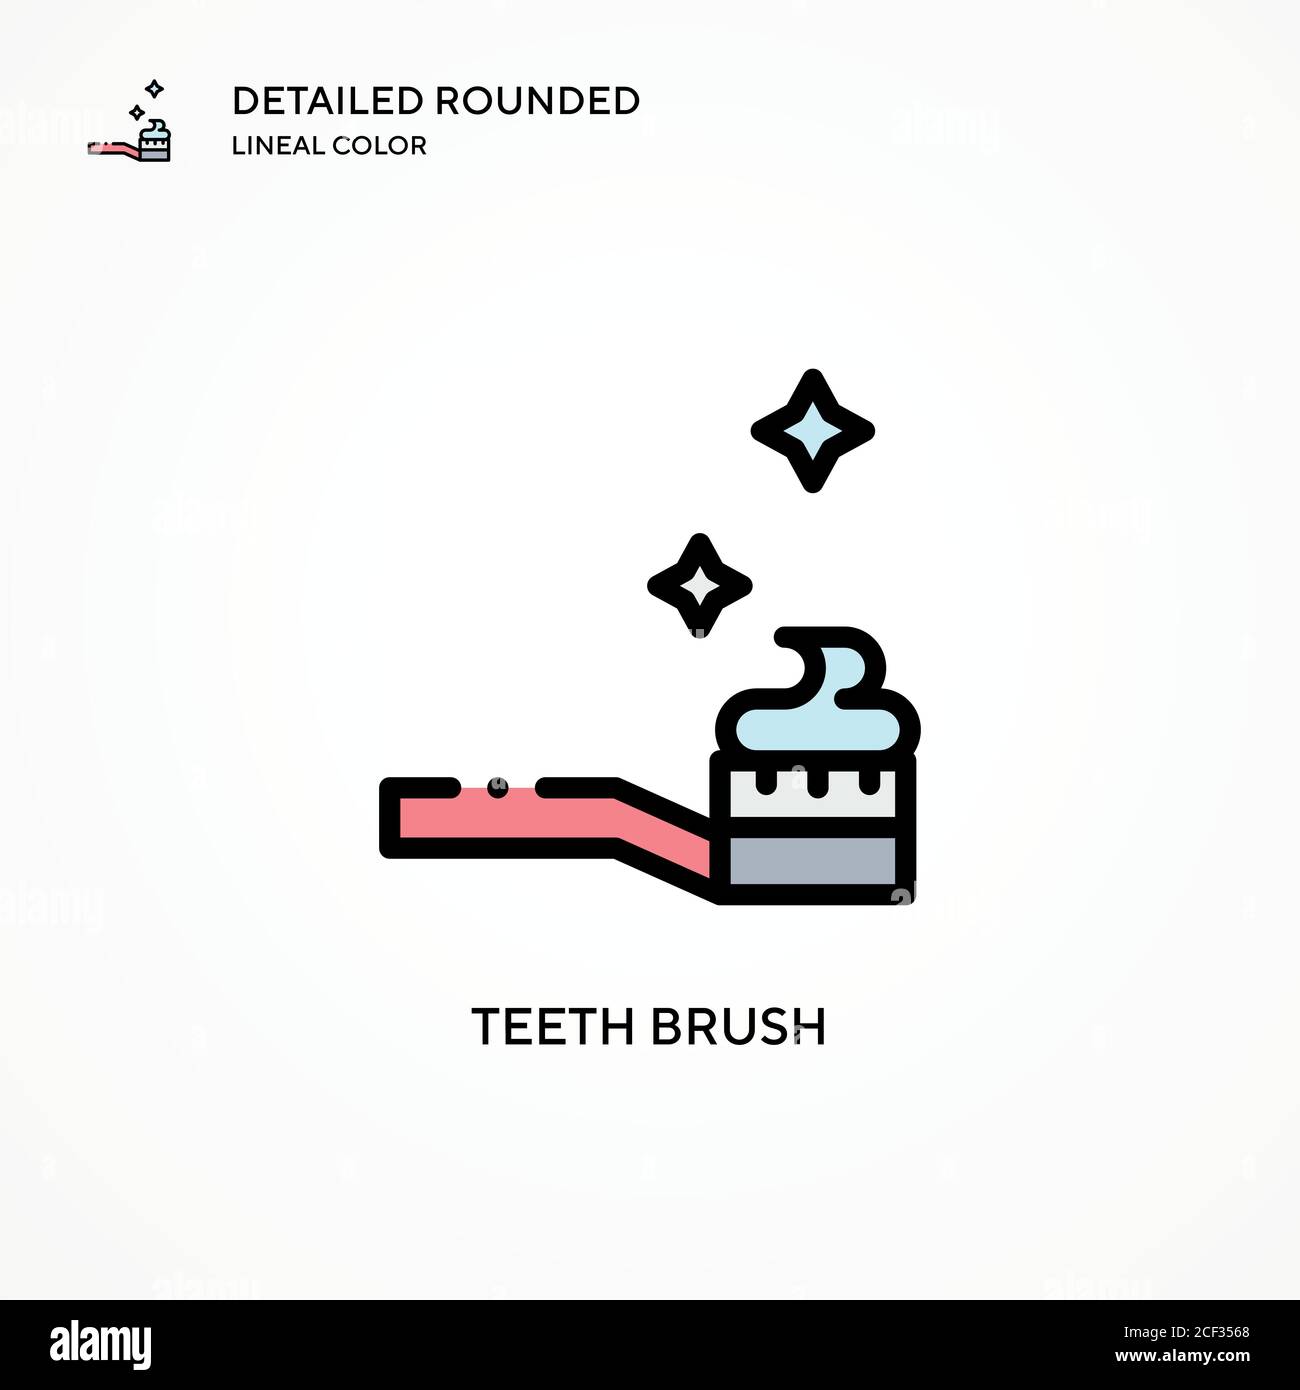 Teeth brush vector icon. Modern vector illustration concepts. Easy to edit and customize. Stock Vector